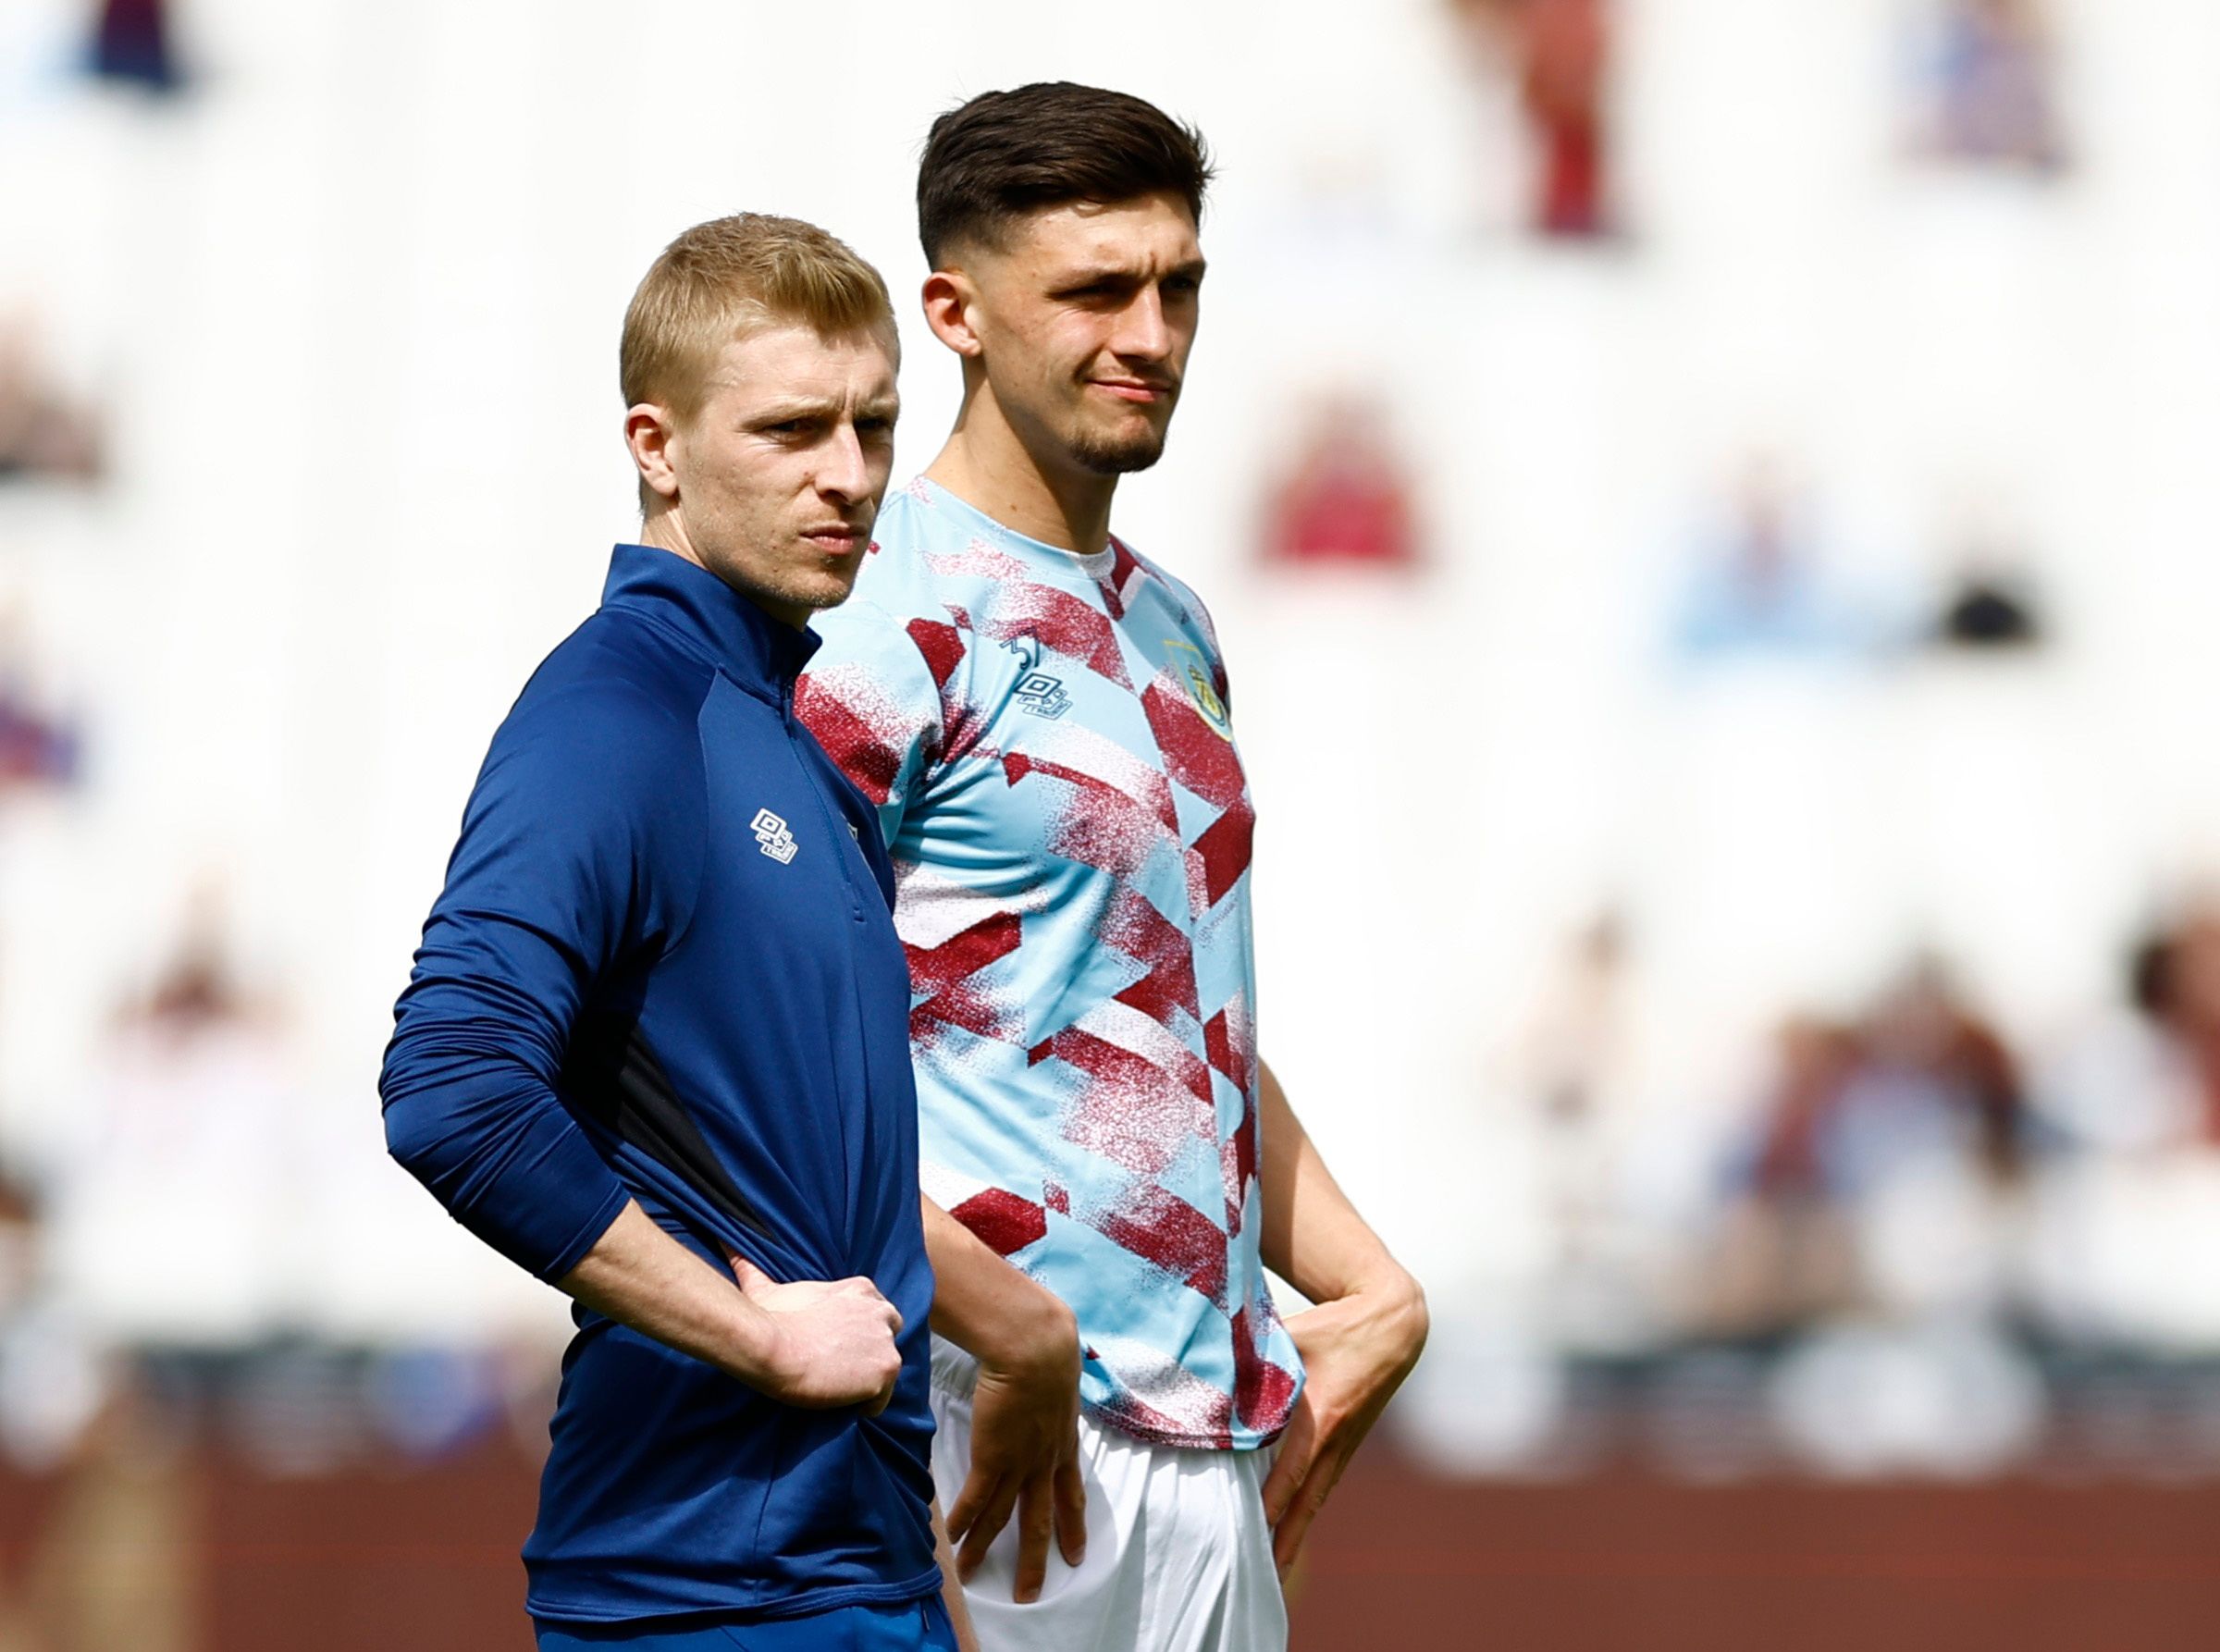 Soccer Football - Premier League - West Ham United v Burnley - London Stadium, London, Britain - April 17, 2022 Burnley's Ben Mee during the warm up before the match Action Images via Reuters/Andrew Boyers EDITORIAL USE ONLY. No use with unauthorized audio, video, data, fixture lists, club/league logos or 'live' services. Online in-match use limited to 75 images, no video emulation. No use in betting, games or single club /league/player publications.  Please contact your account representative f